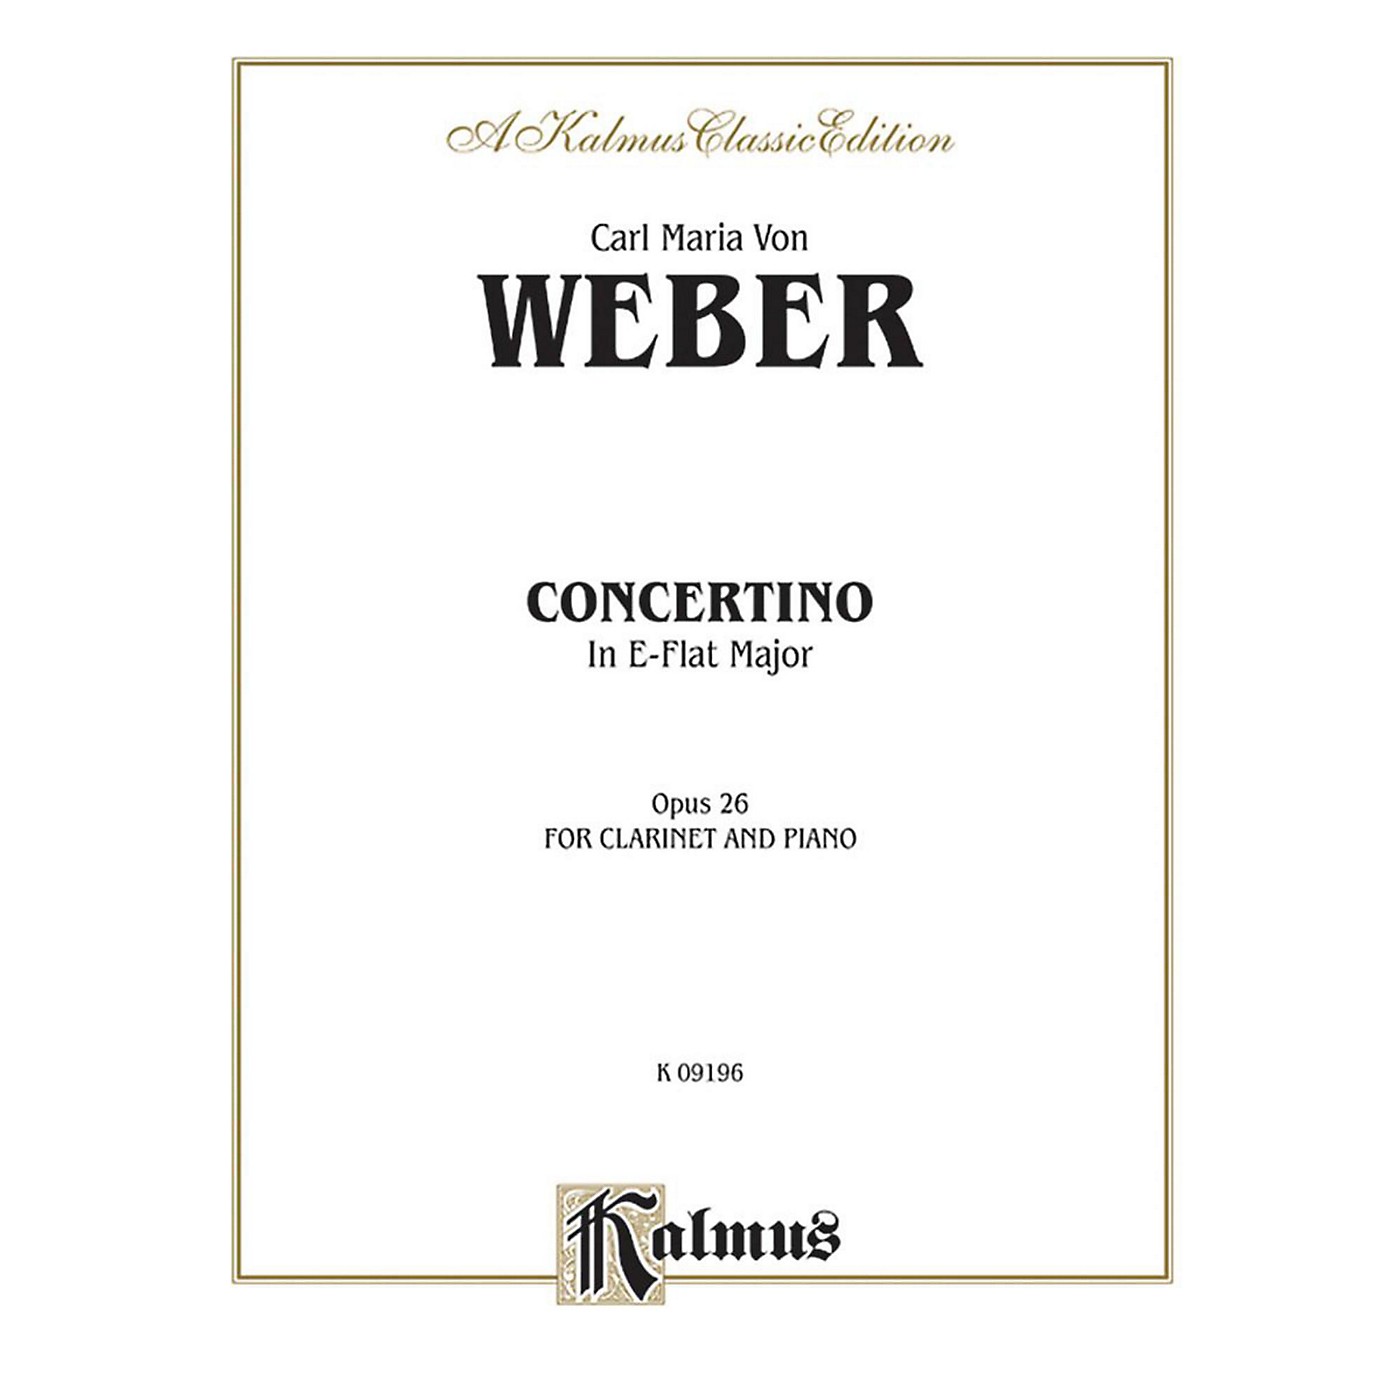 Alfred Concertino for Clarinet in E-Flat Major Op. 26 for Clarinet By Carl Maria von Weber Book thumbnail